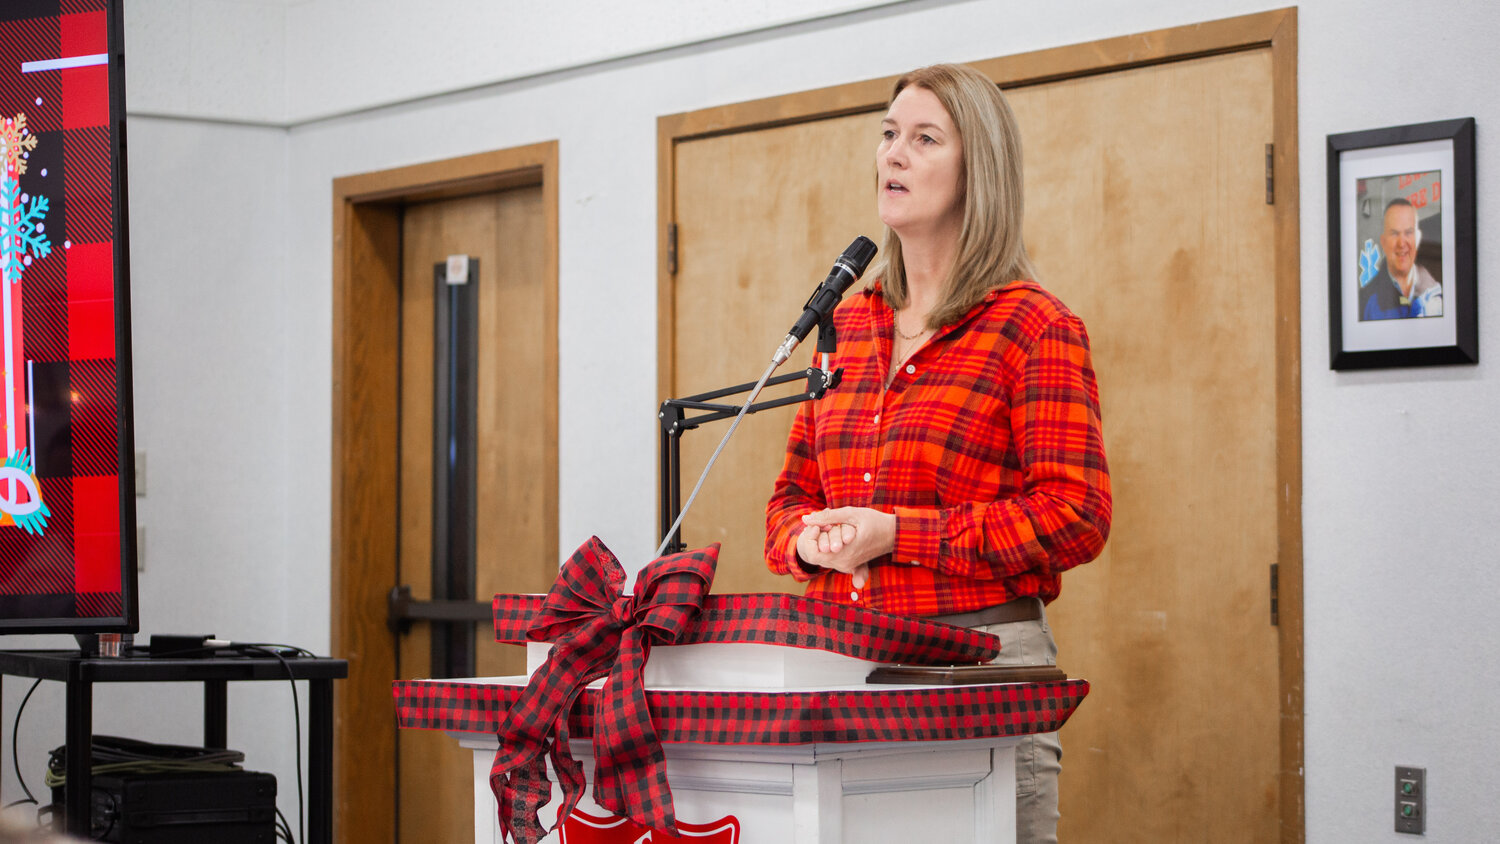 During her remarks, Centralia Mayor Kelly Smith Johnson highlighted the essential role that hope plays in life.